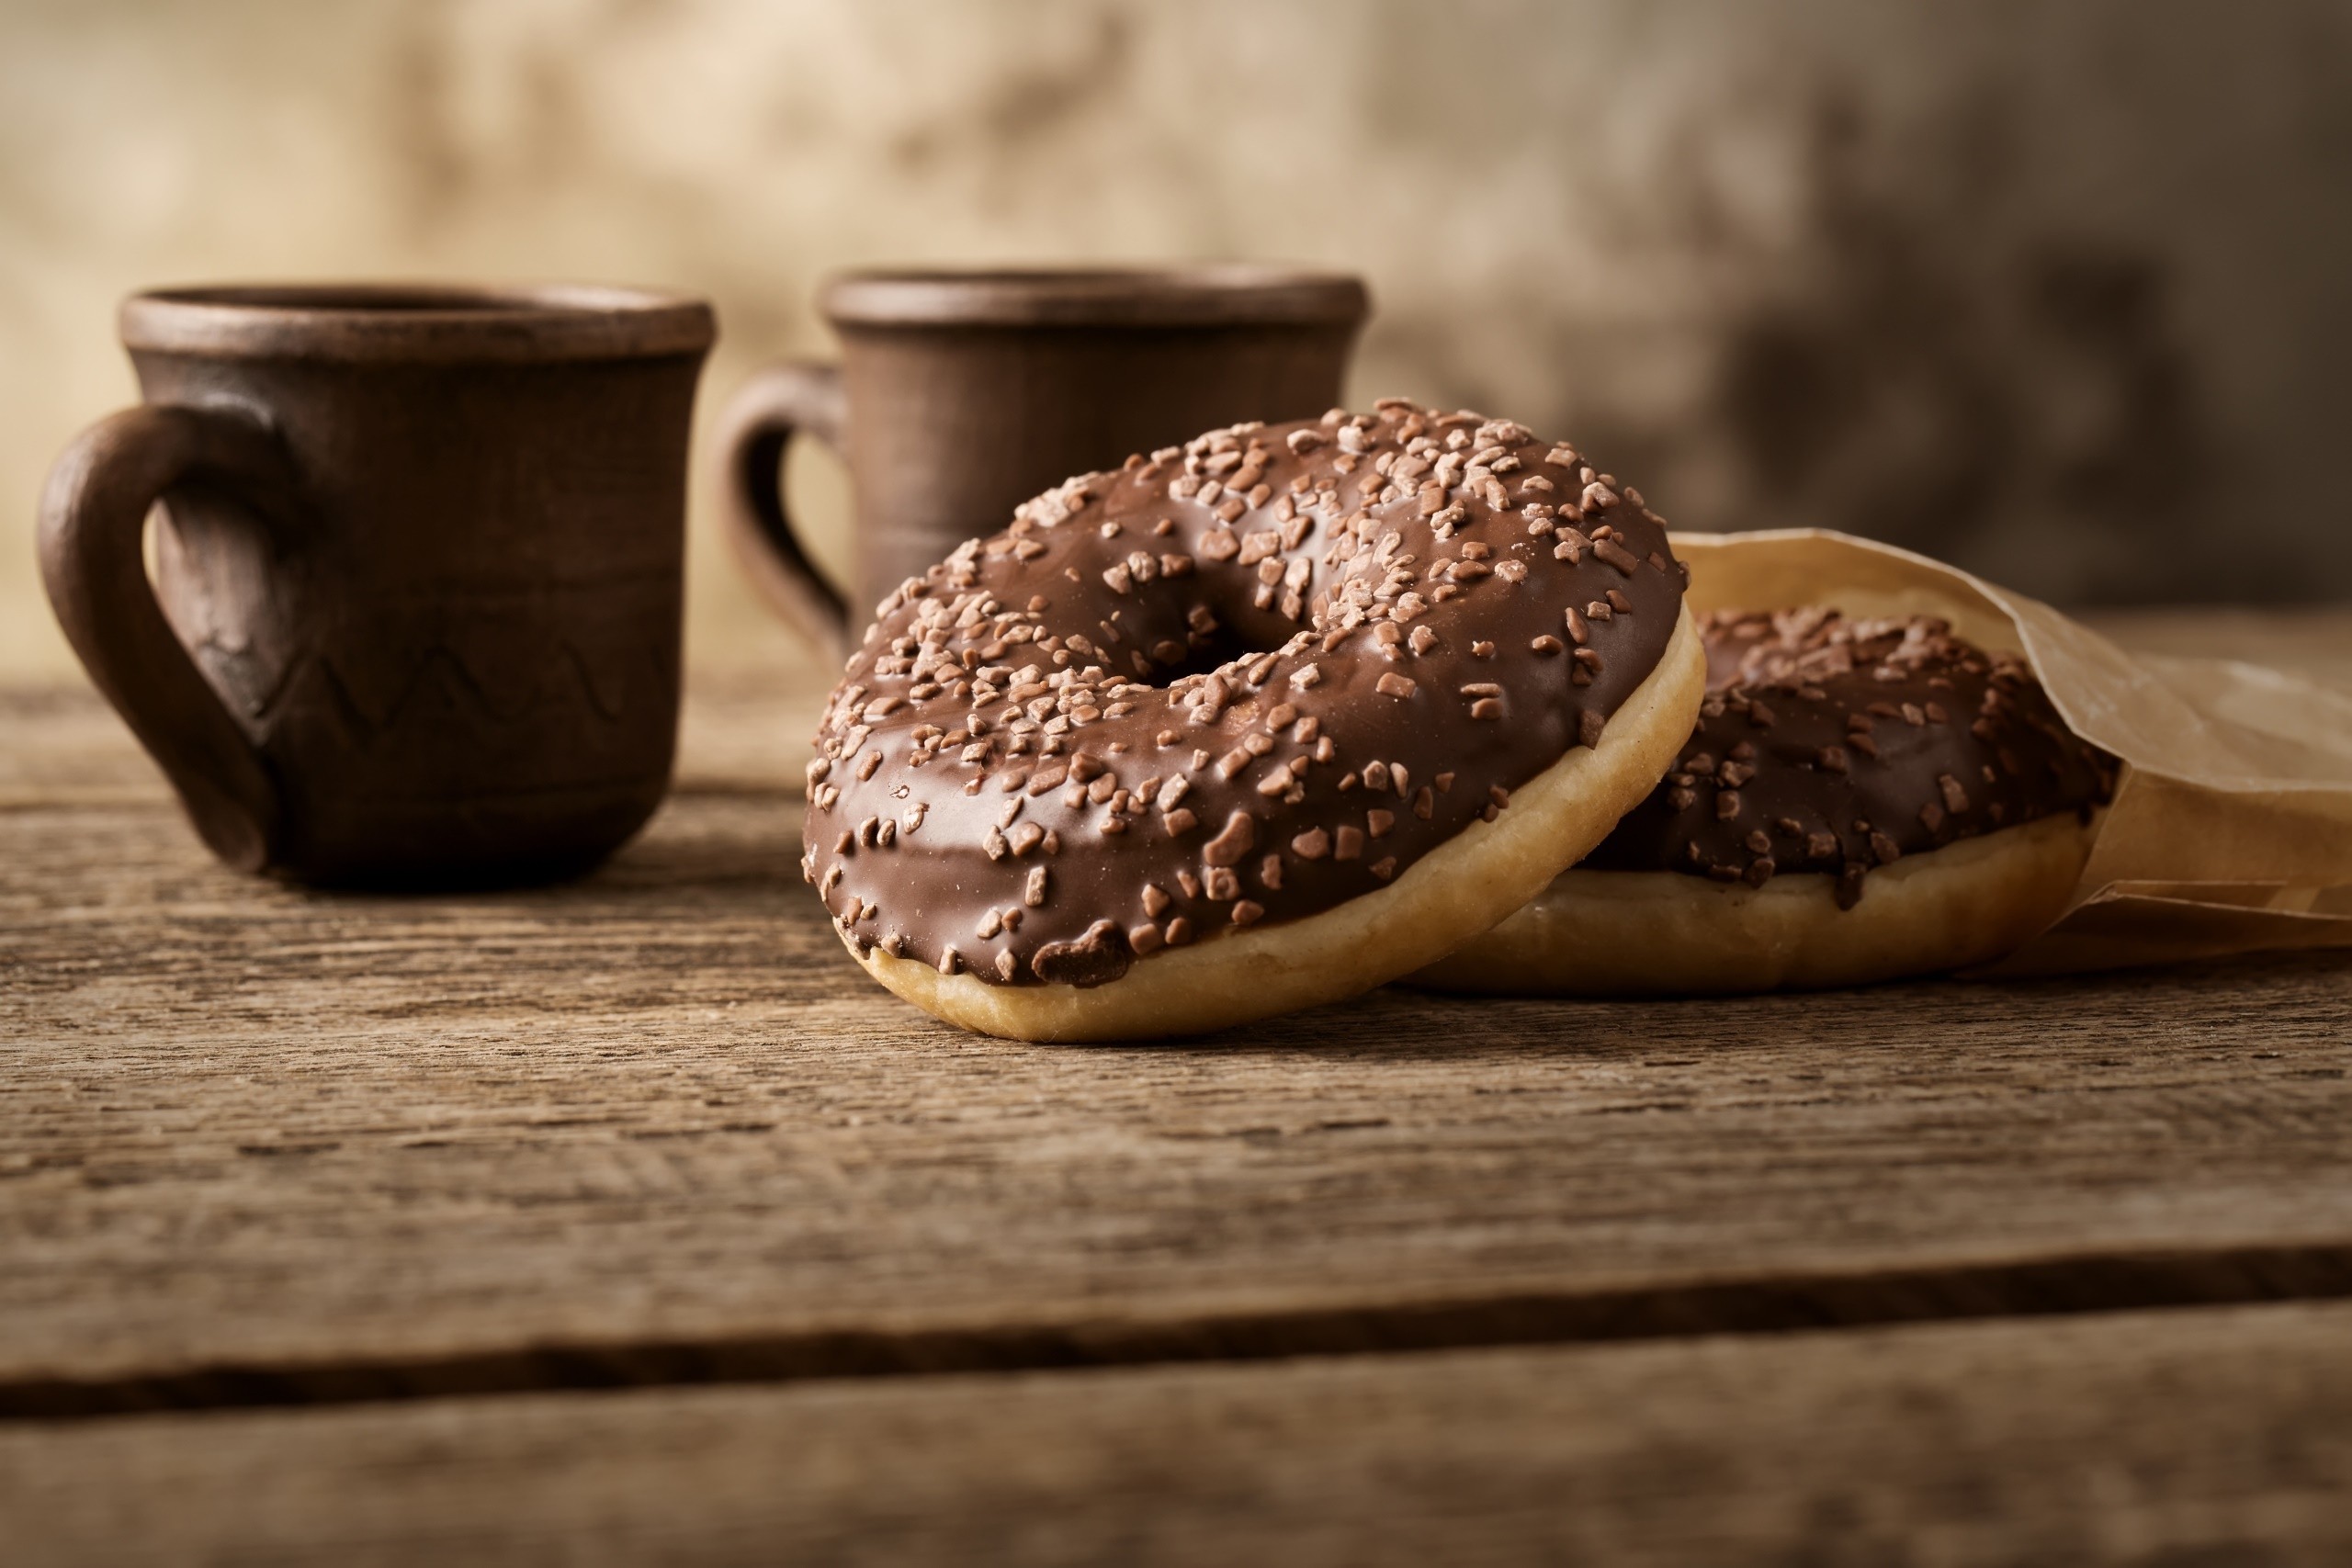 General 2560x1707 wooden surface brown cup food donut sweets